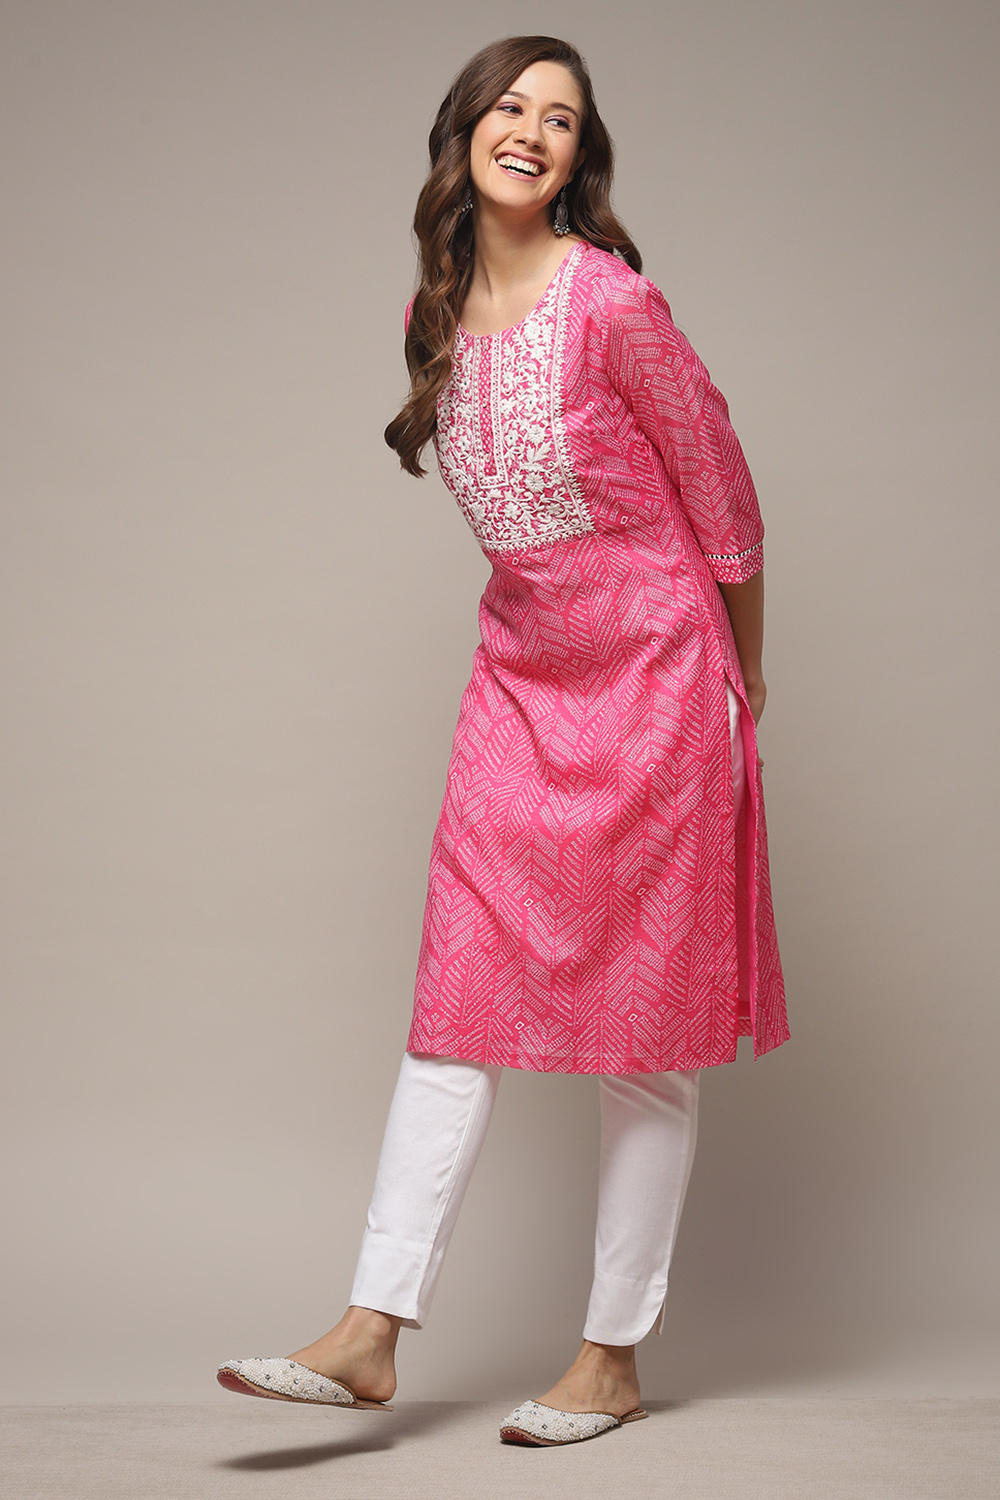 Biba Lucknow Ethnic Fashion Stores Sales Offers Numbers Discounts